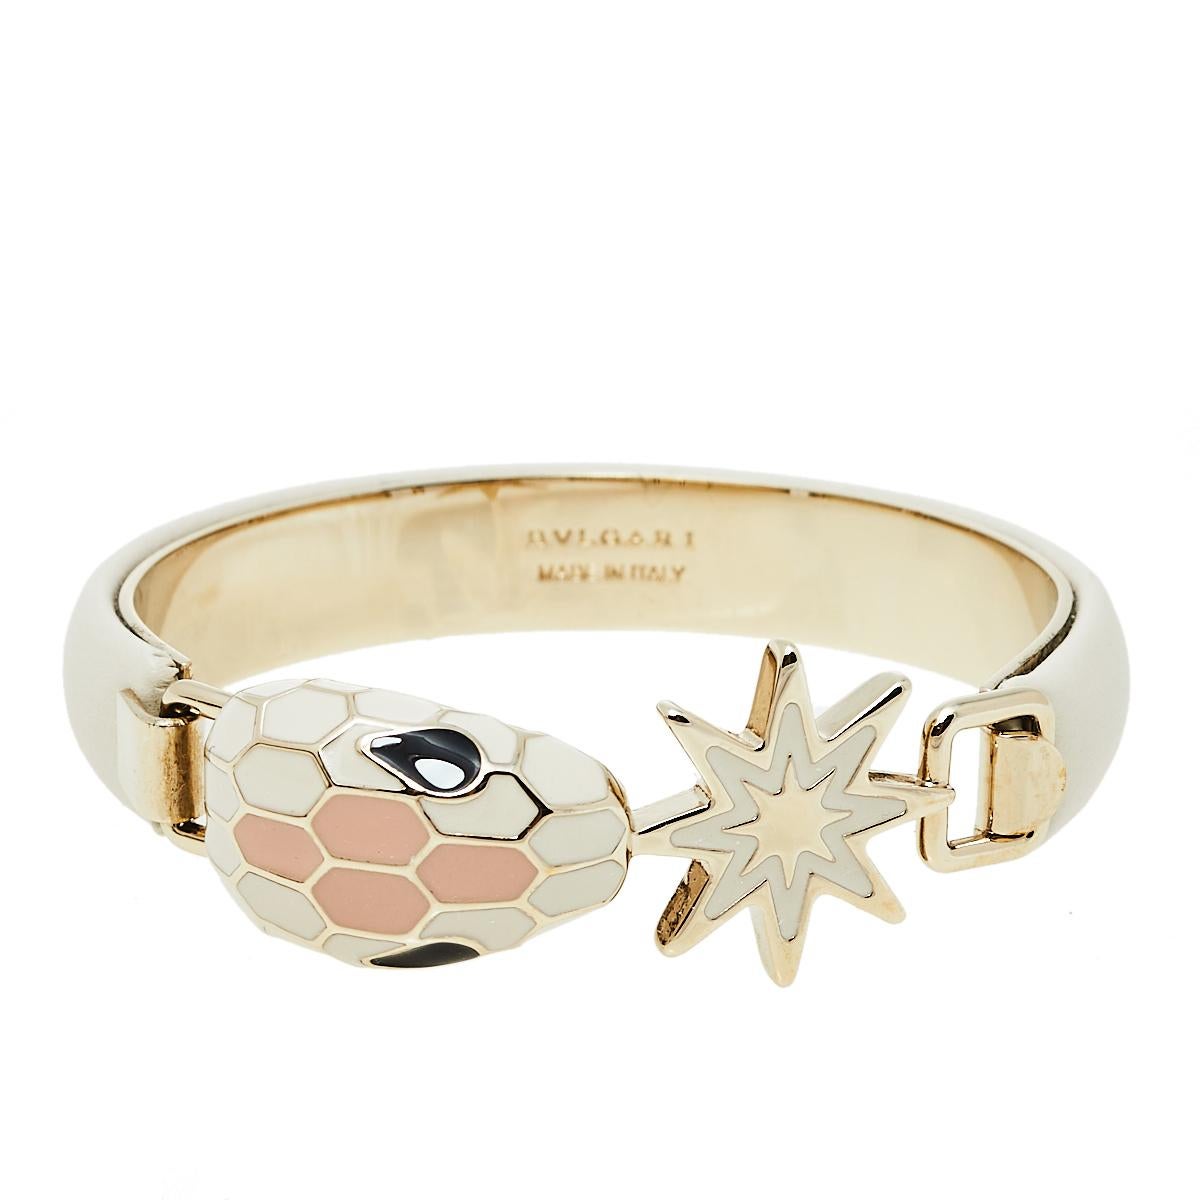 This iconic Bvlgari Serpenti Forever bracelet is from the brand's Holiday Capsule collection, 2019. It is finely crafted in leather and gold-plated metal and features the signature snake head along with a festive star charm, both coated with enamel.